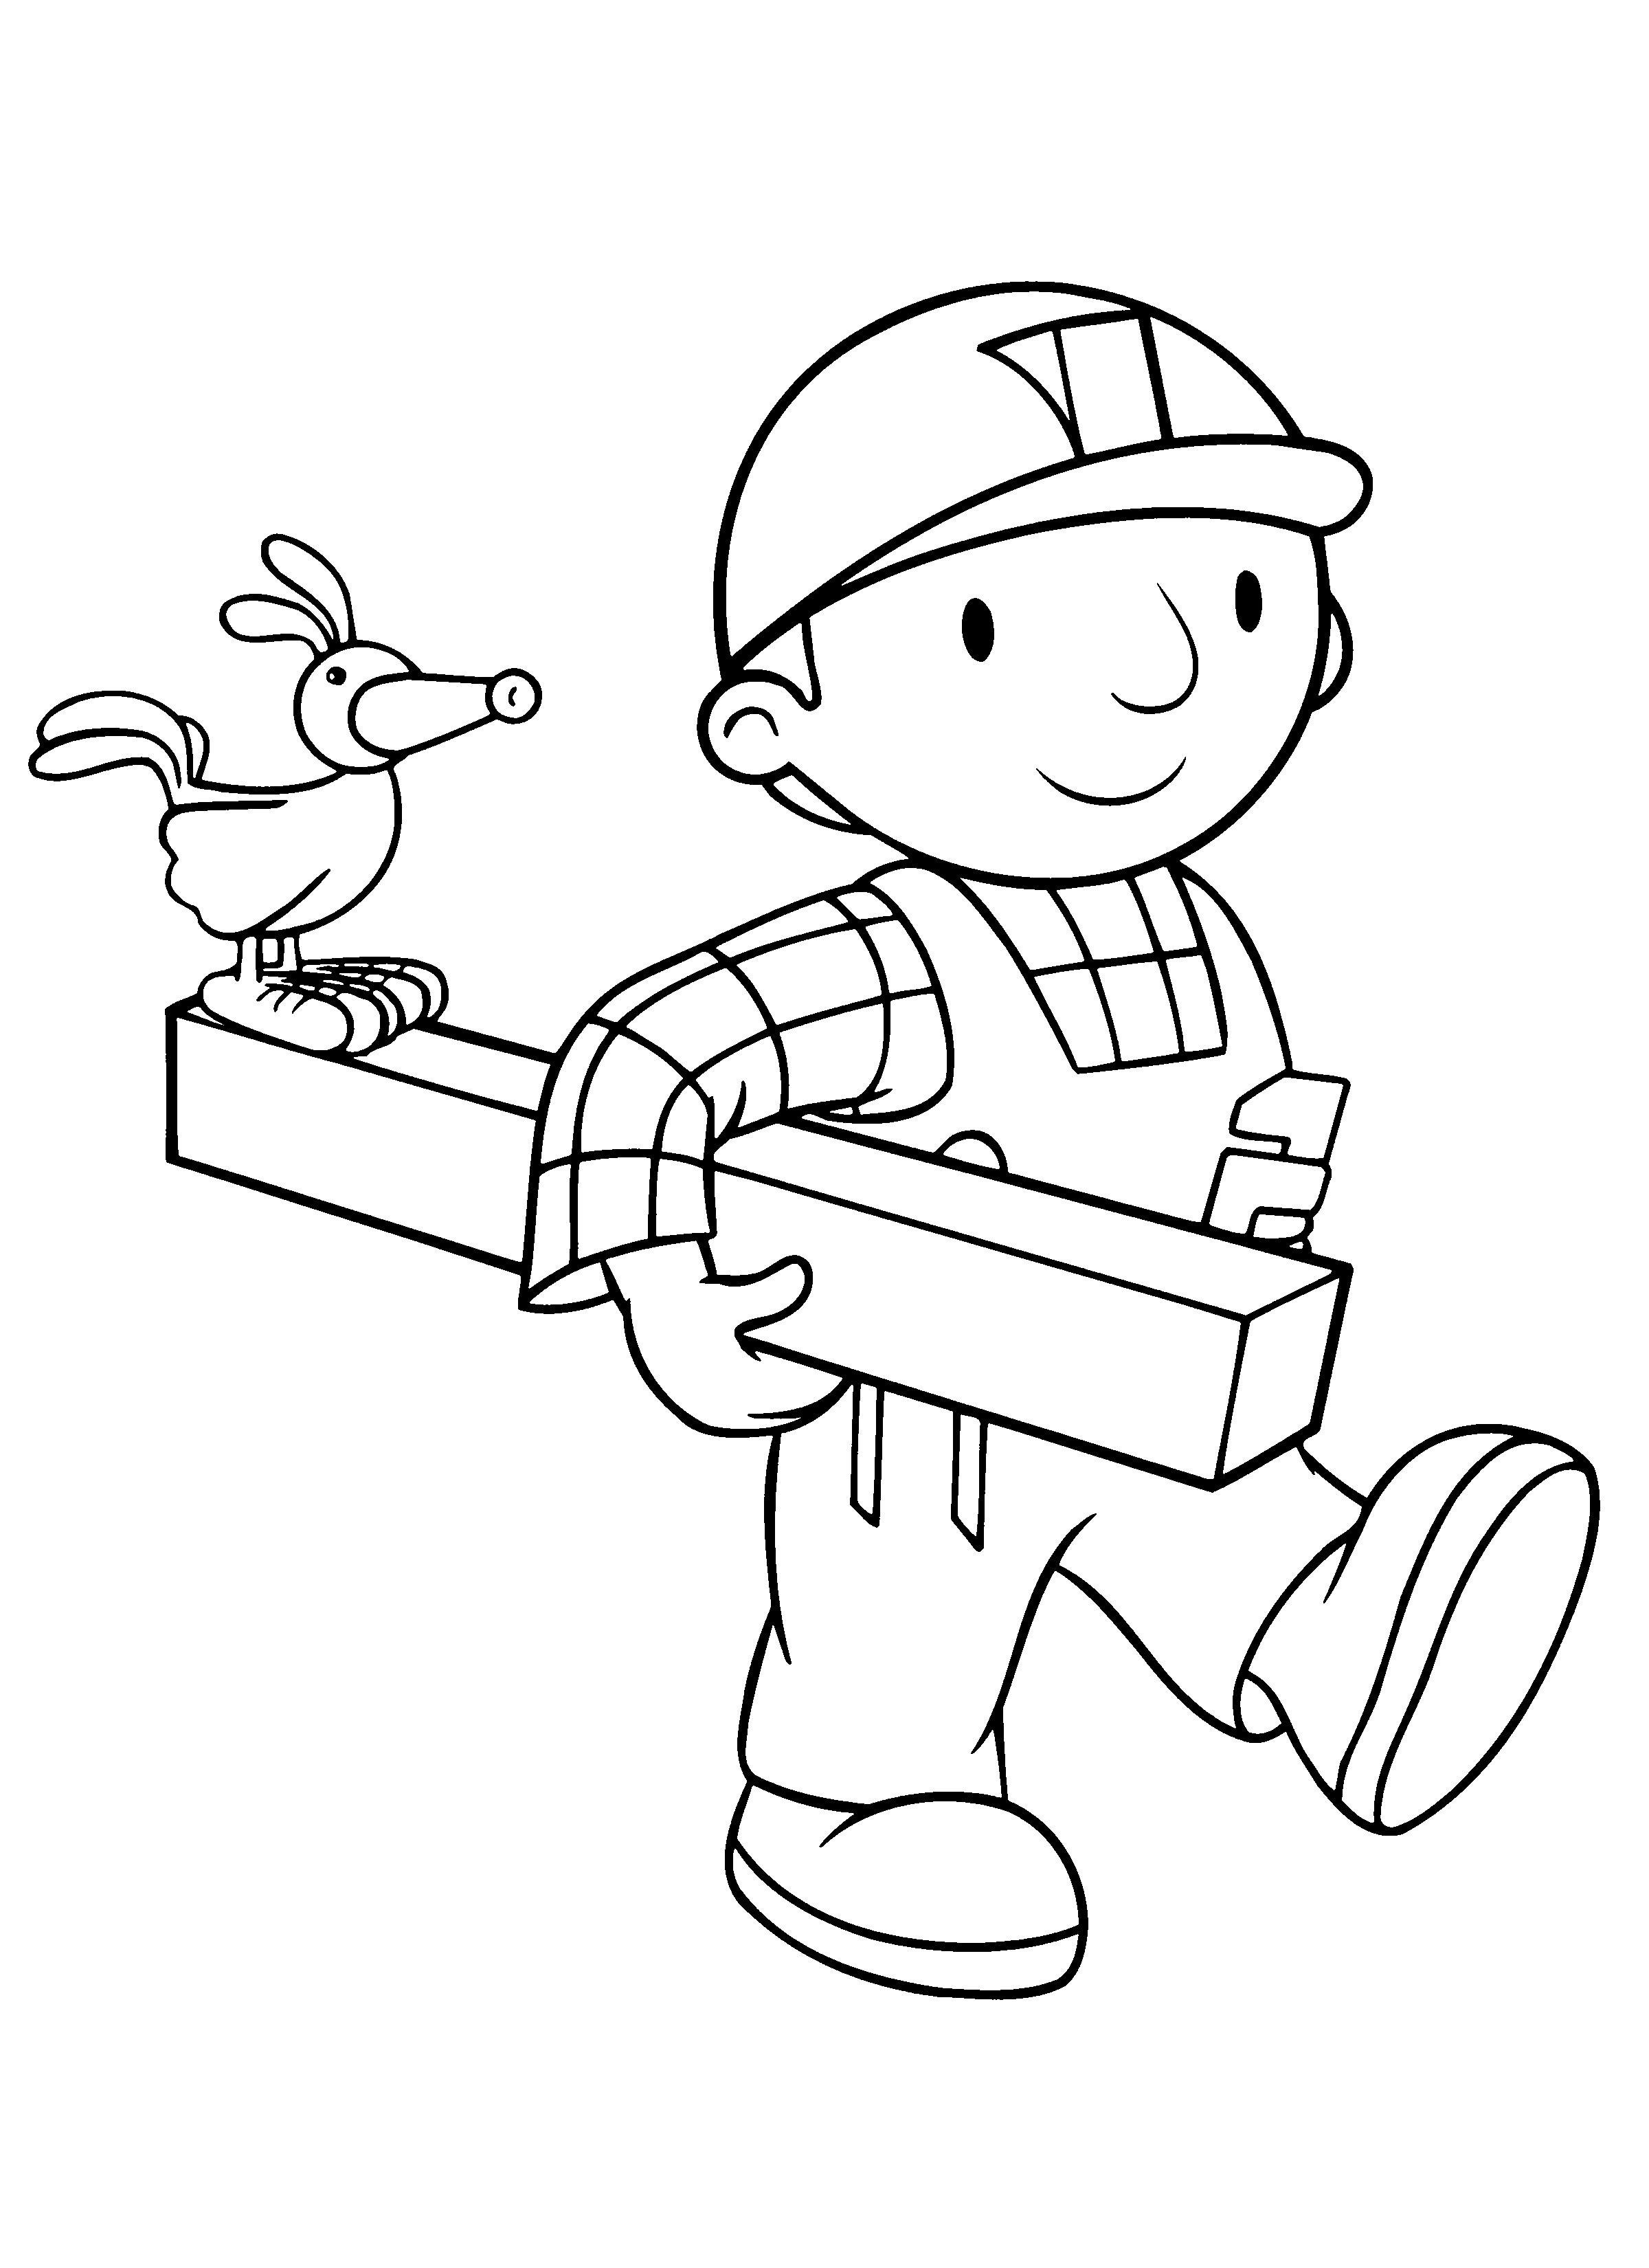 animated-coloring-pages-bob-the-builder-image-0093